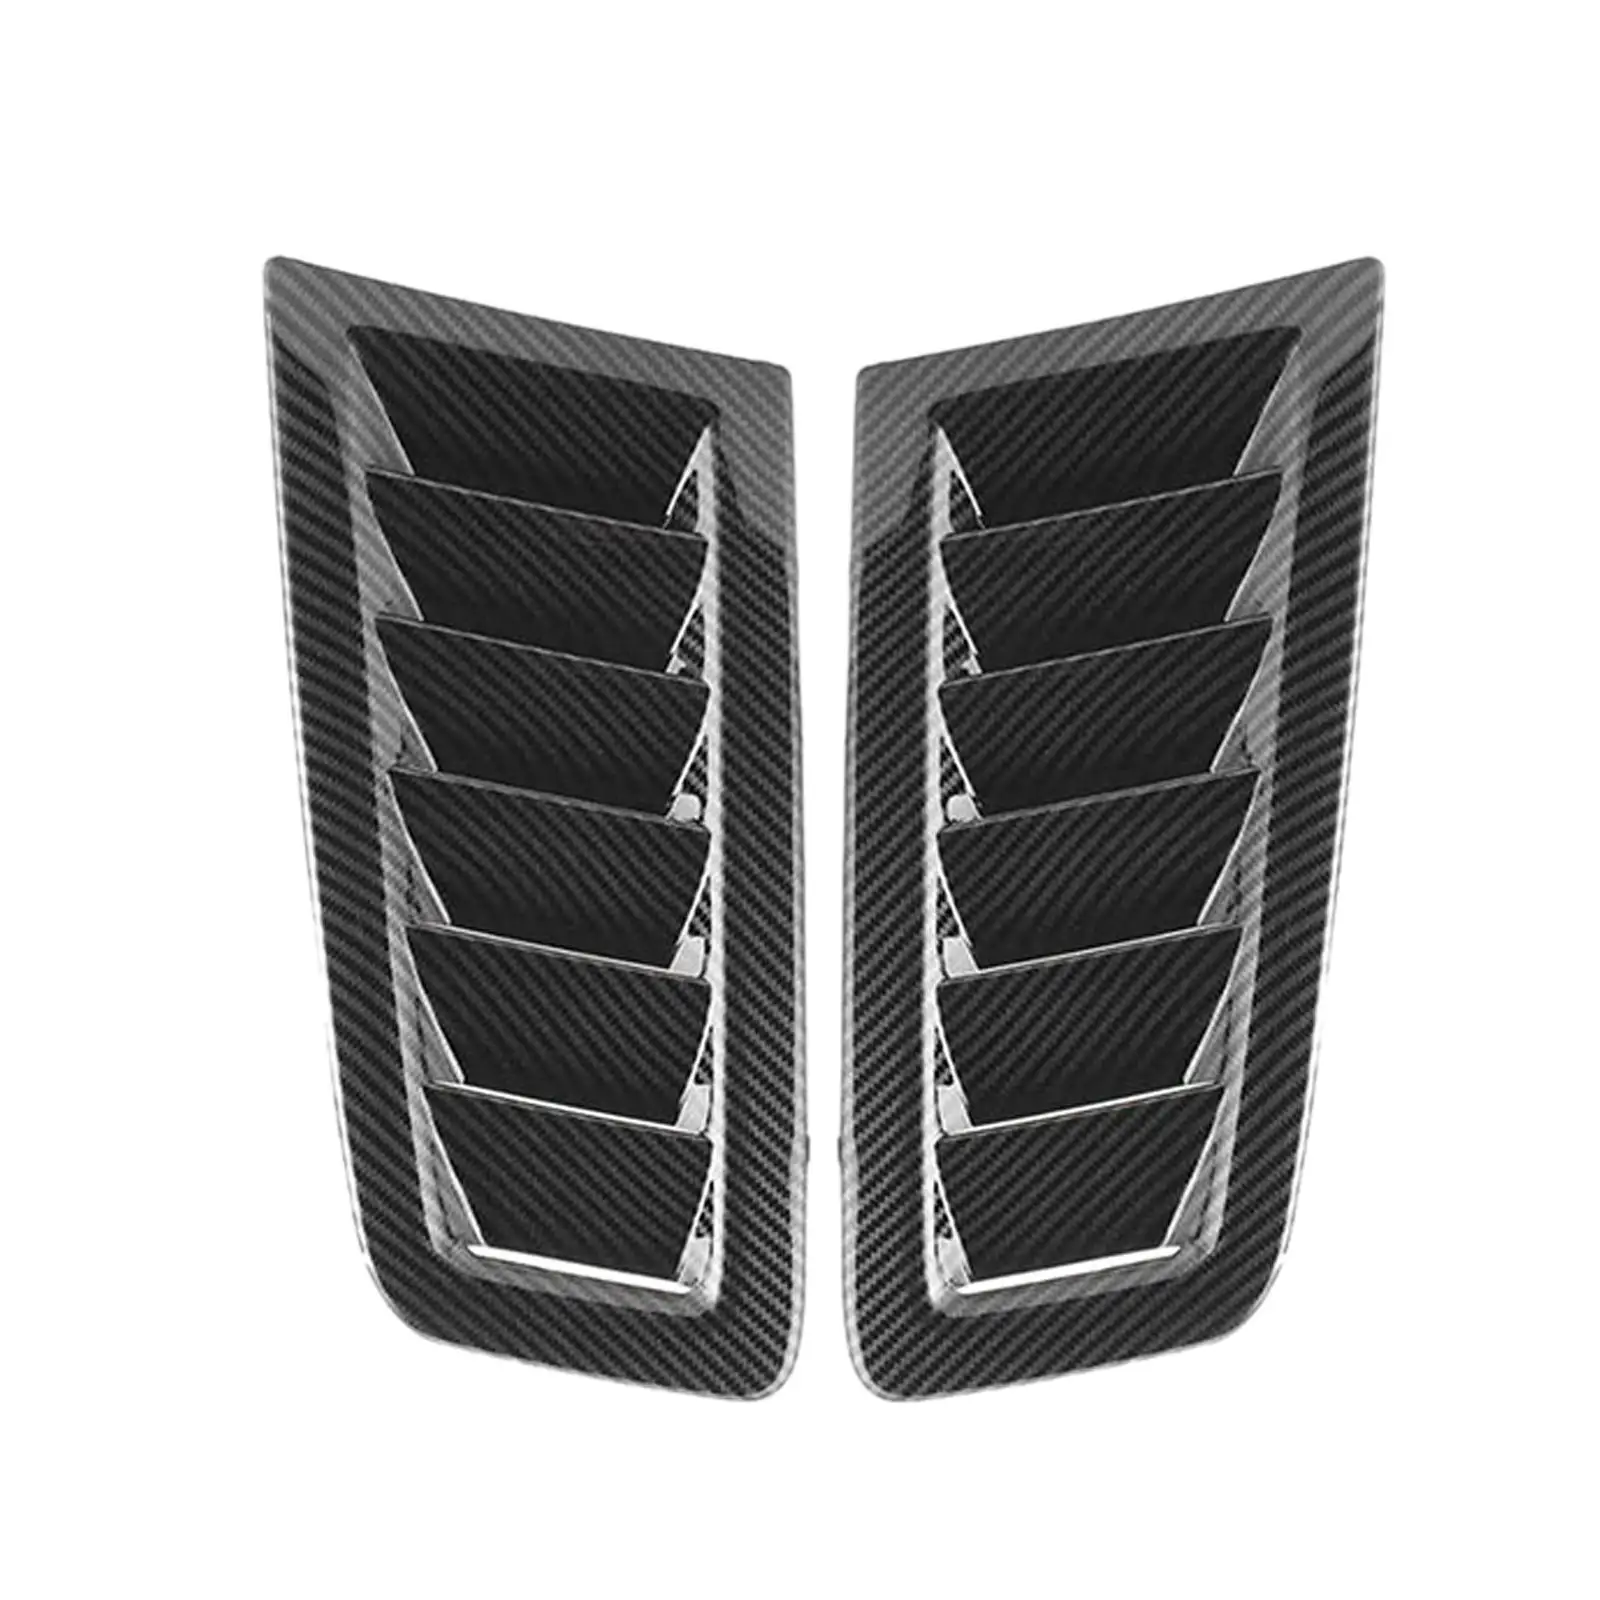 2x Car Hood Vent Scoops Replace Parts High Quality Easy Installation Bonnet Air